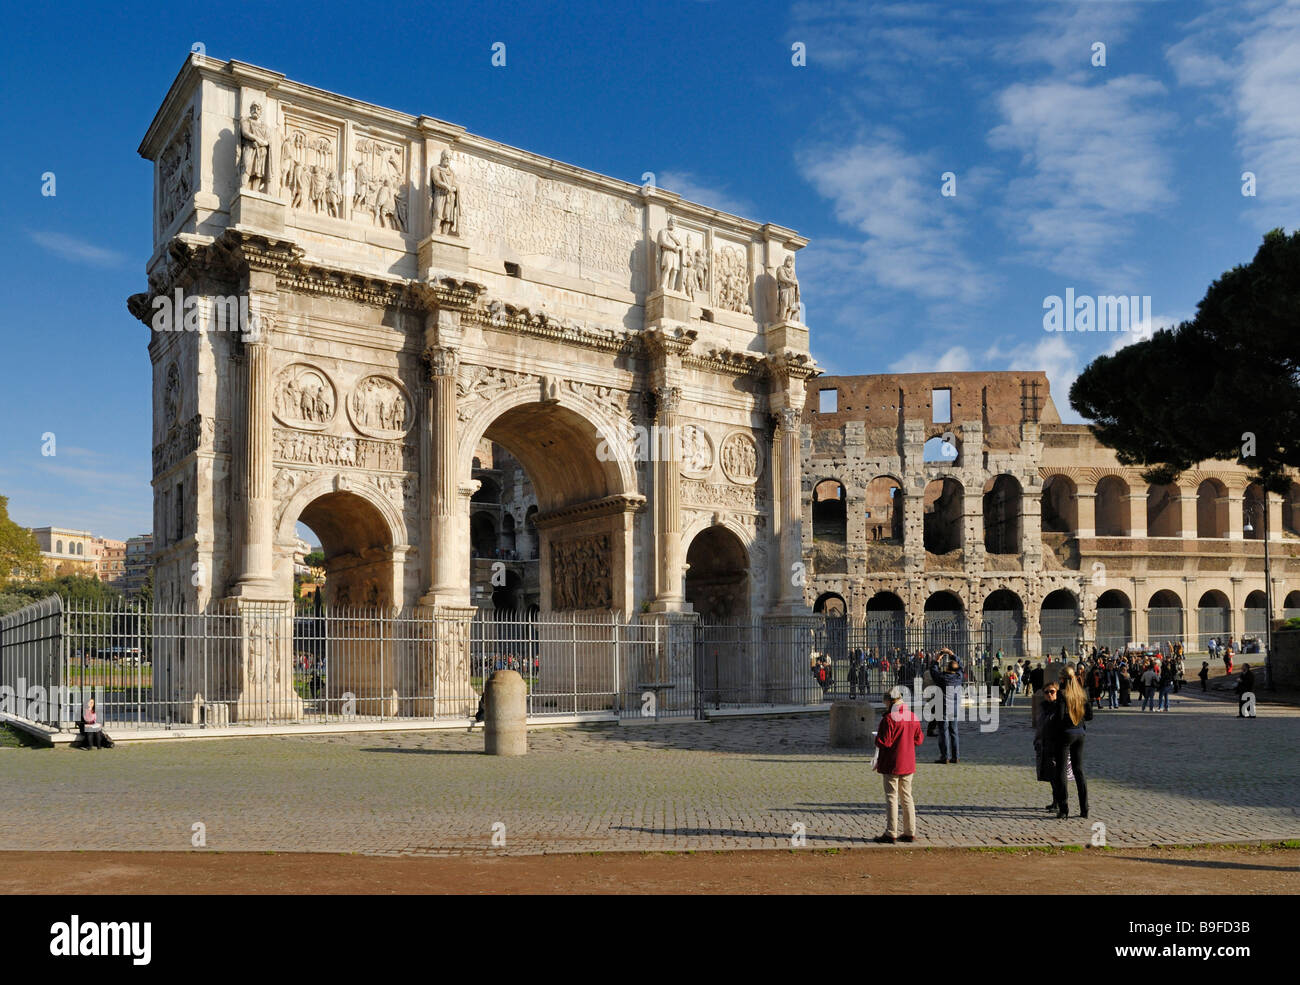 People in front of triumphal arch, Arch of Constantine, Rome, Latium, Italy Stock Photo